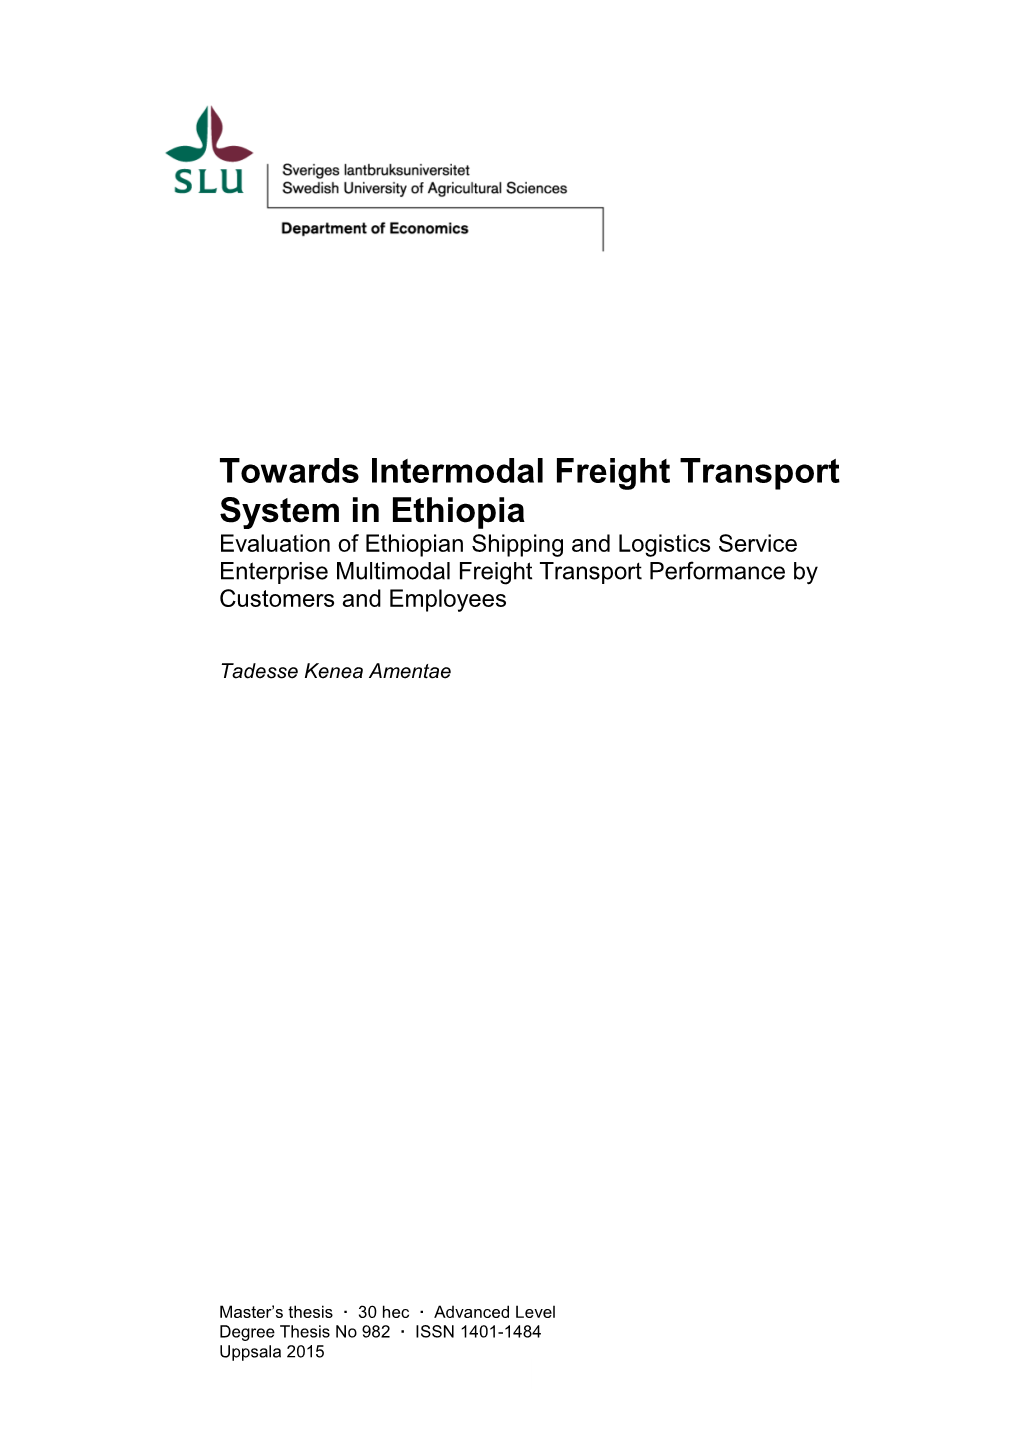 Towards Intermodal Freight Transport System in Ethiopia